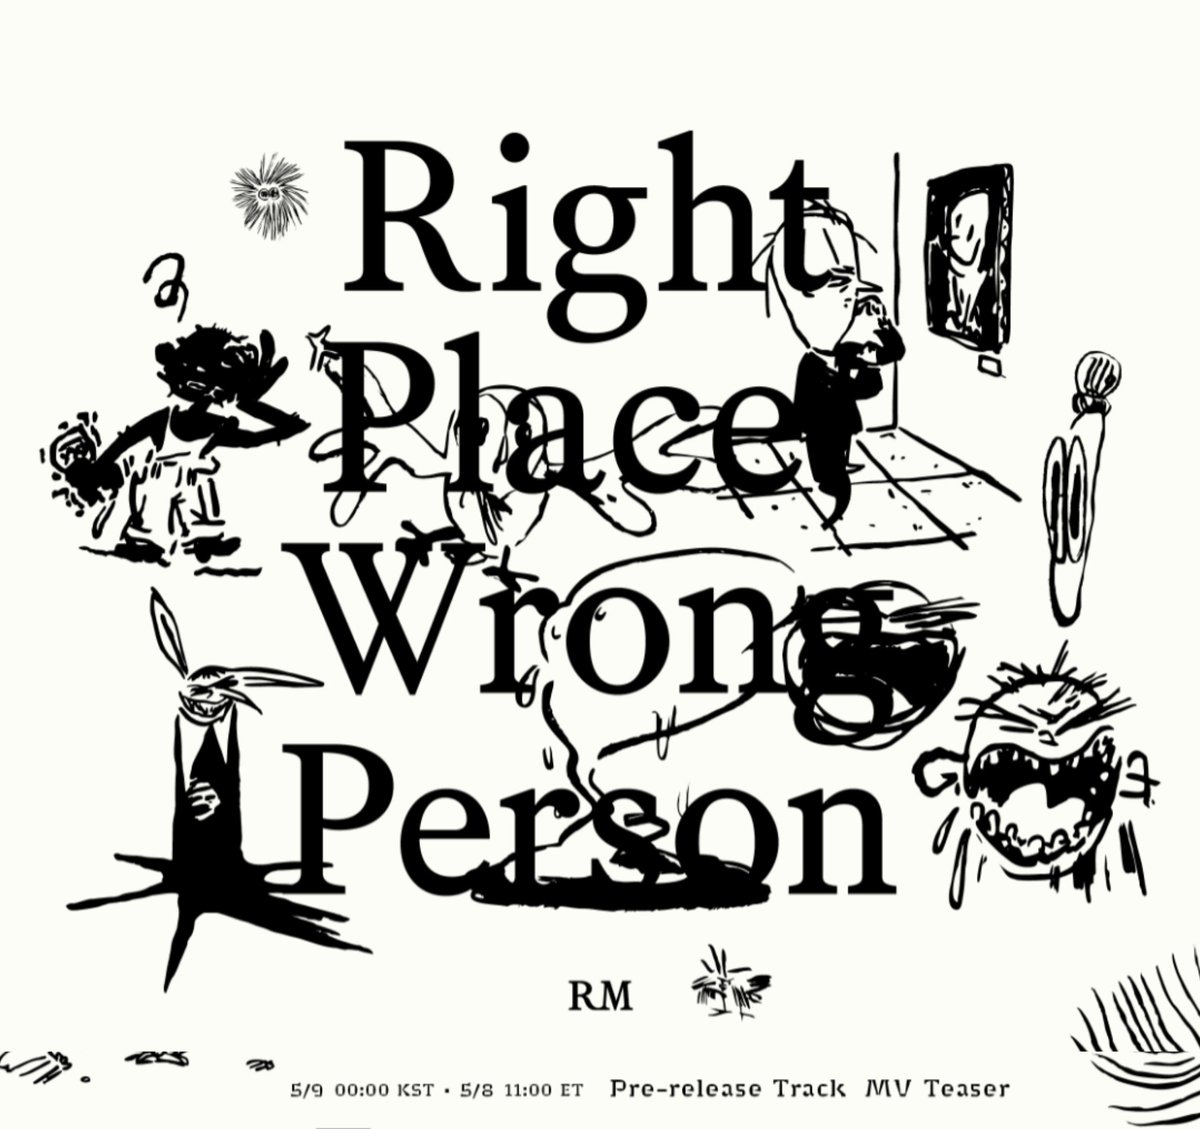 RT AND REPLY

RPWP BY RM
COME BACK TO ME BY RM
COME BACK TO ME TEASER
COME BACK TO ME IS COMING
RIGHT PLACE WRONG PERSON
#Comebacktome #Comebacktome_D1
#RM #RightPlaceWrongPerson